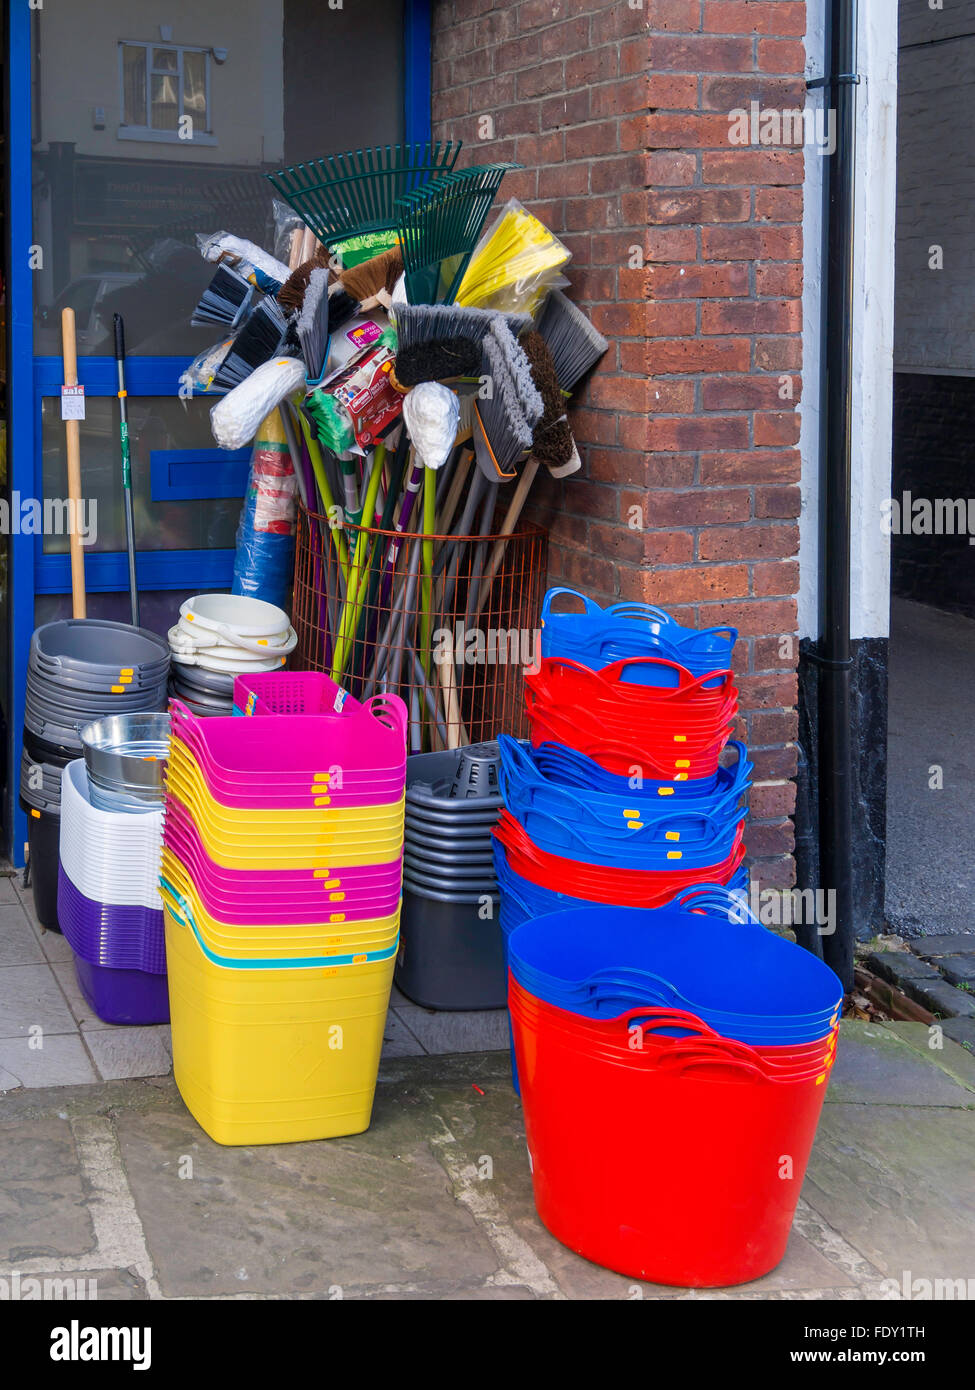 https://c8.alamy.com/comp/FDY1TH/display-of-plastic-bucket-containers-and-brooms-and-mops-for-cleaning-FDY1TH.jpg